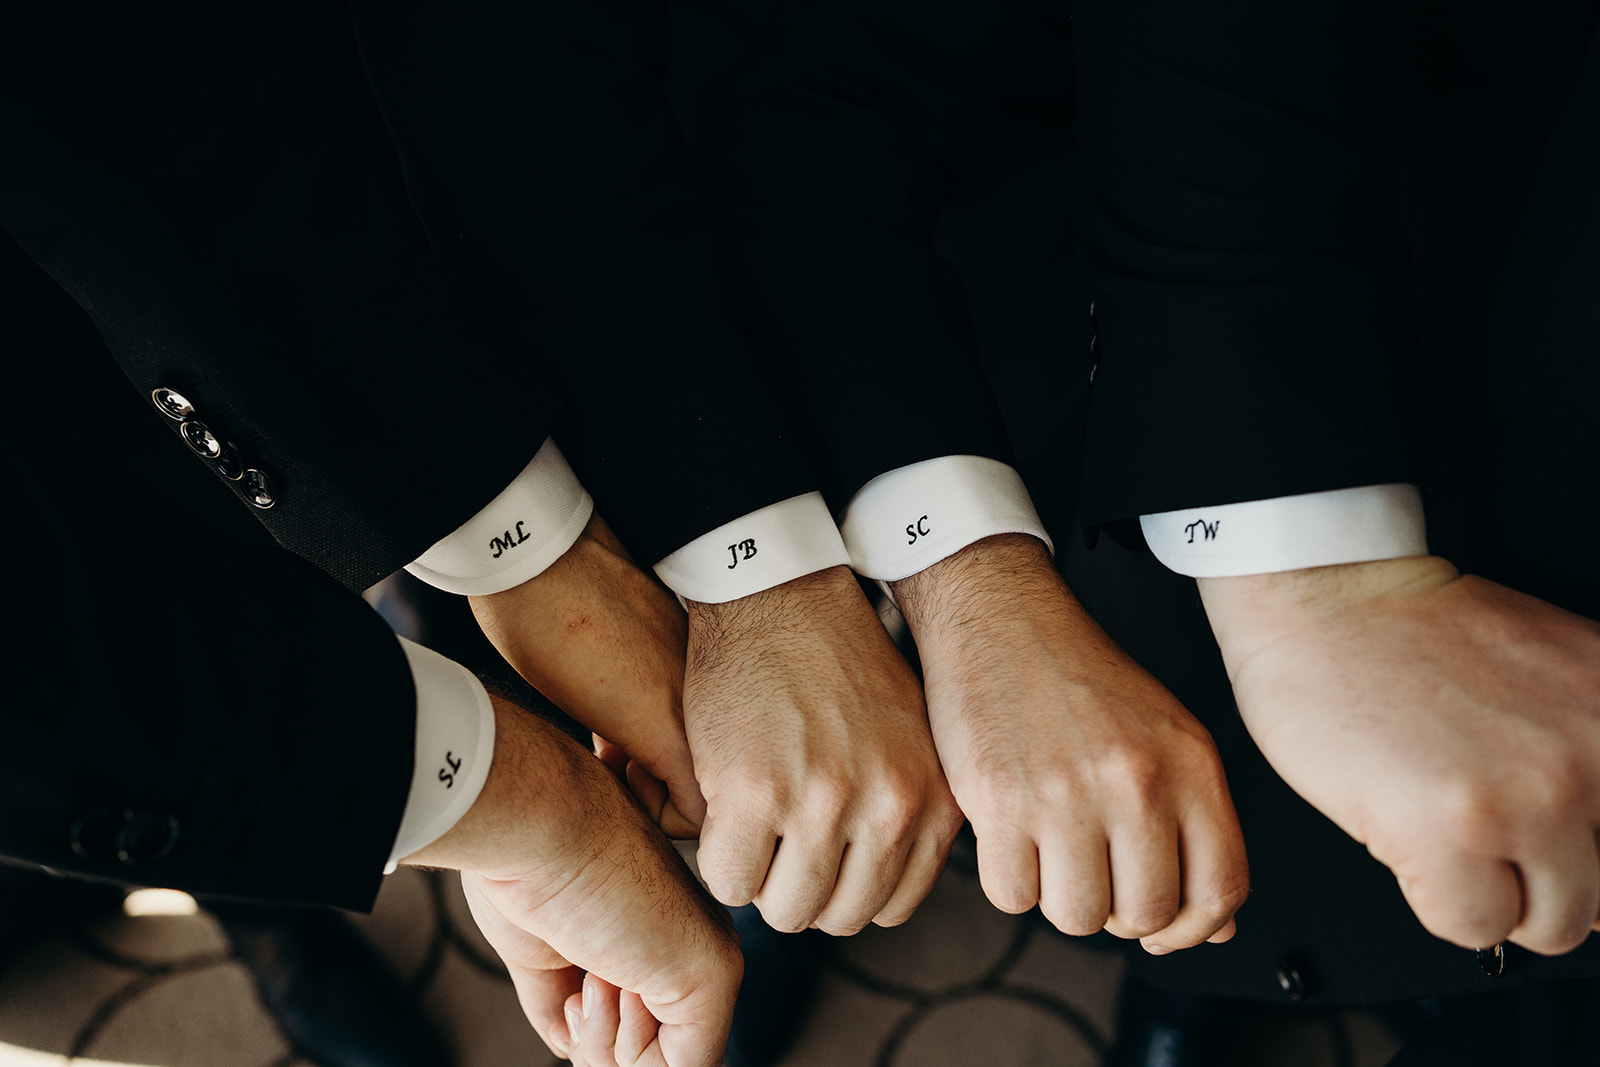 Close-up of 5 hands with black initials on white sleeve (Left to Right: S.L., M.L., J.B., S.C., and T.W.)